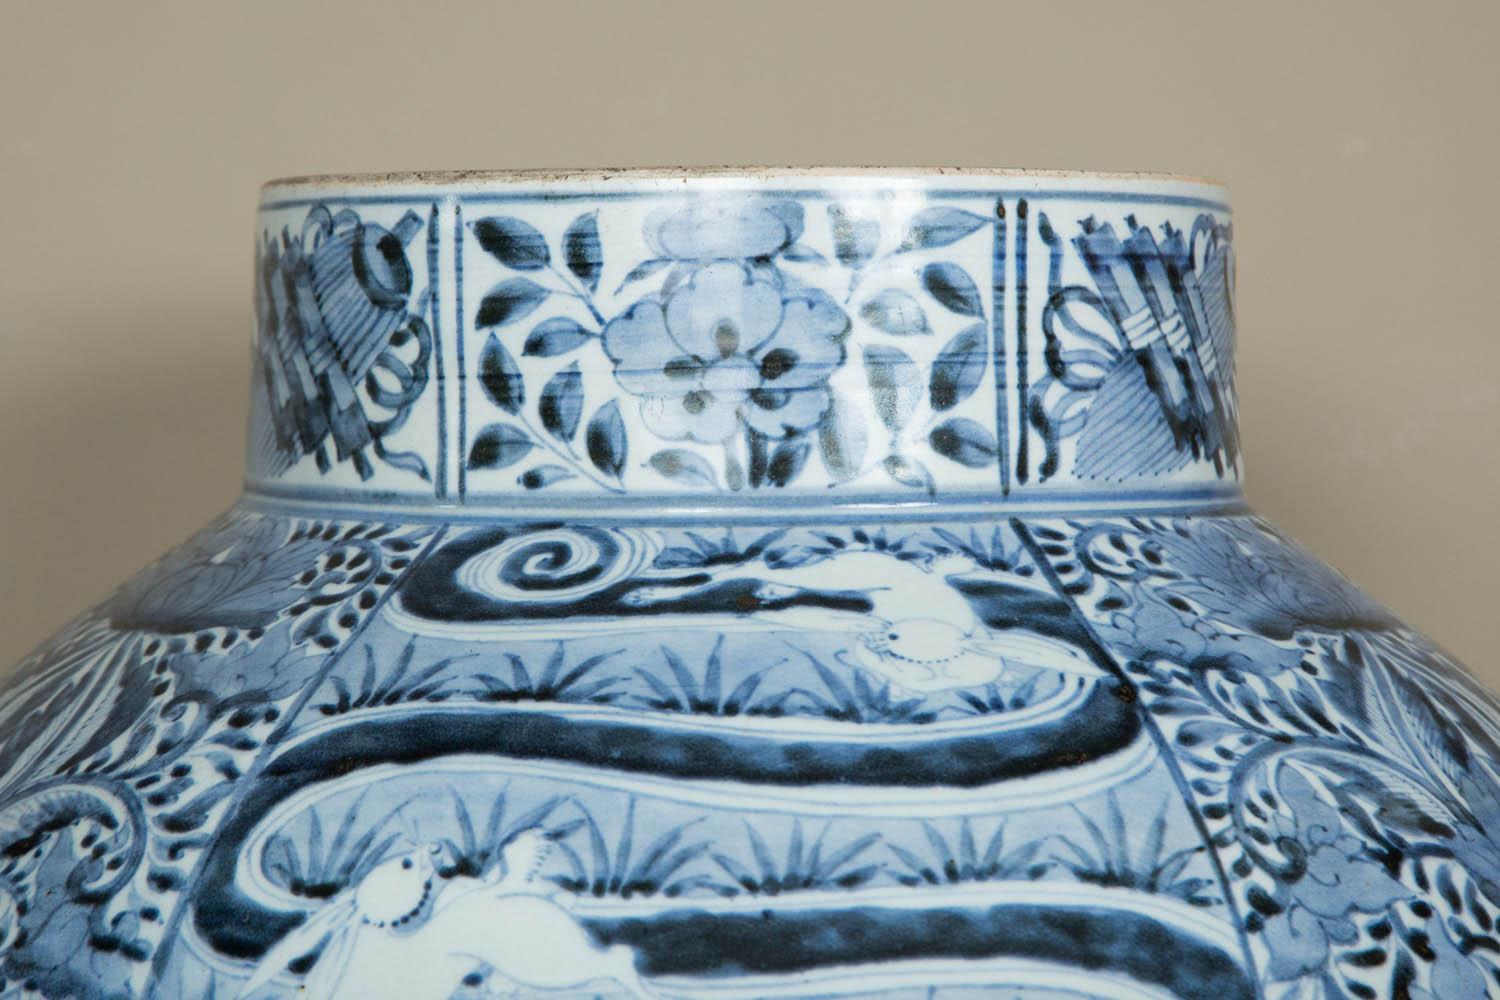 A large blue and white Japanese Arita porcelain vase featuring an interesting decoration of phoenixes and strolling branches of peonies and chrysanthemums among rocks and little hares wearing an unusual necklace. Very fine decoration.
Dating, circa